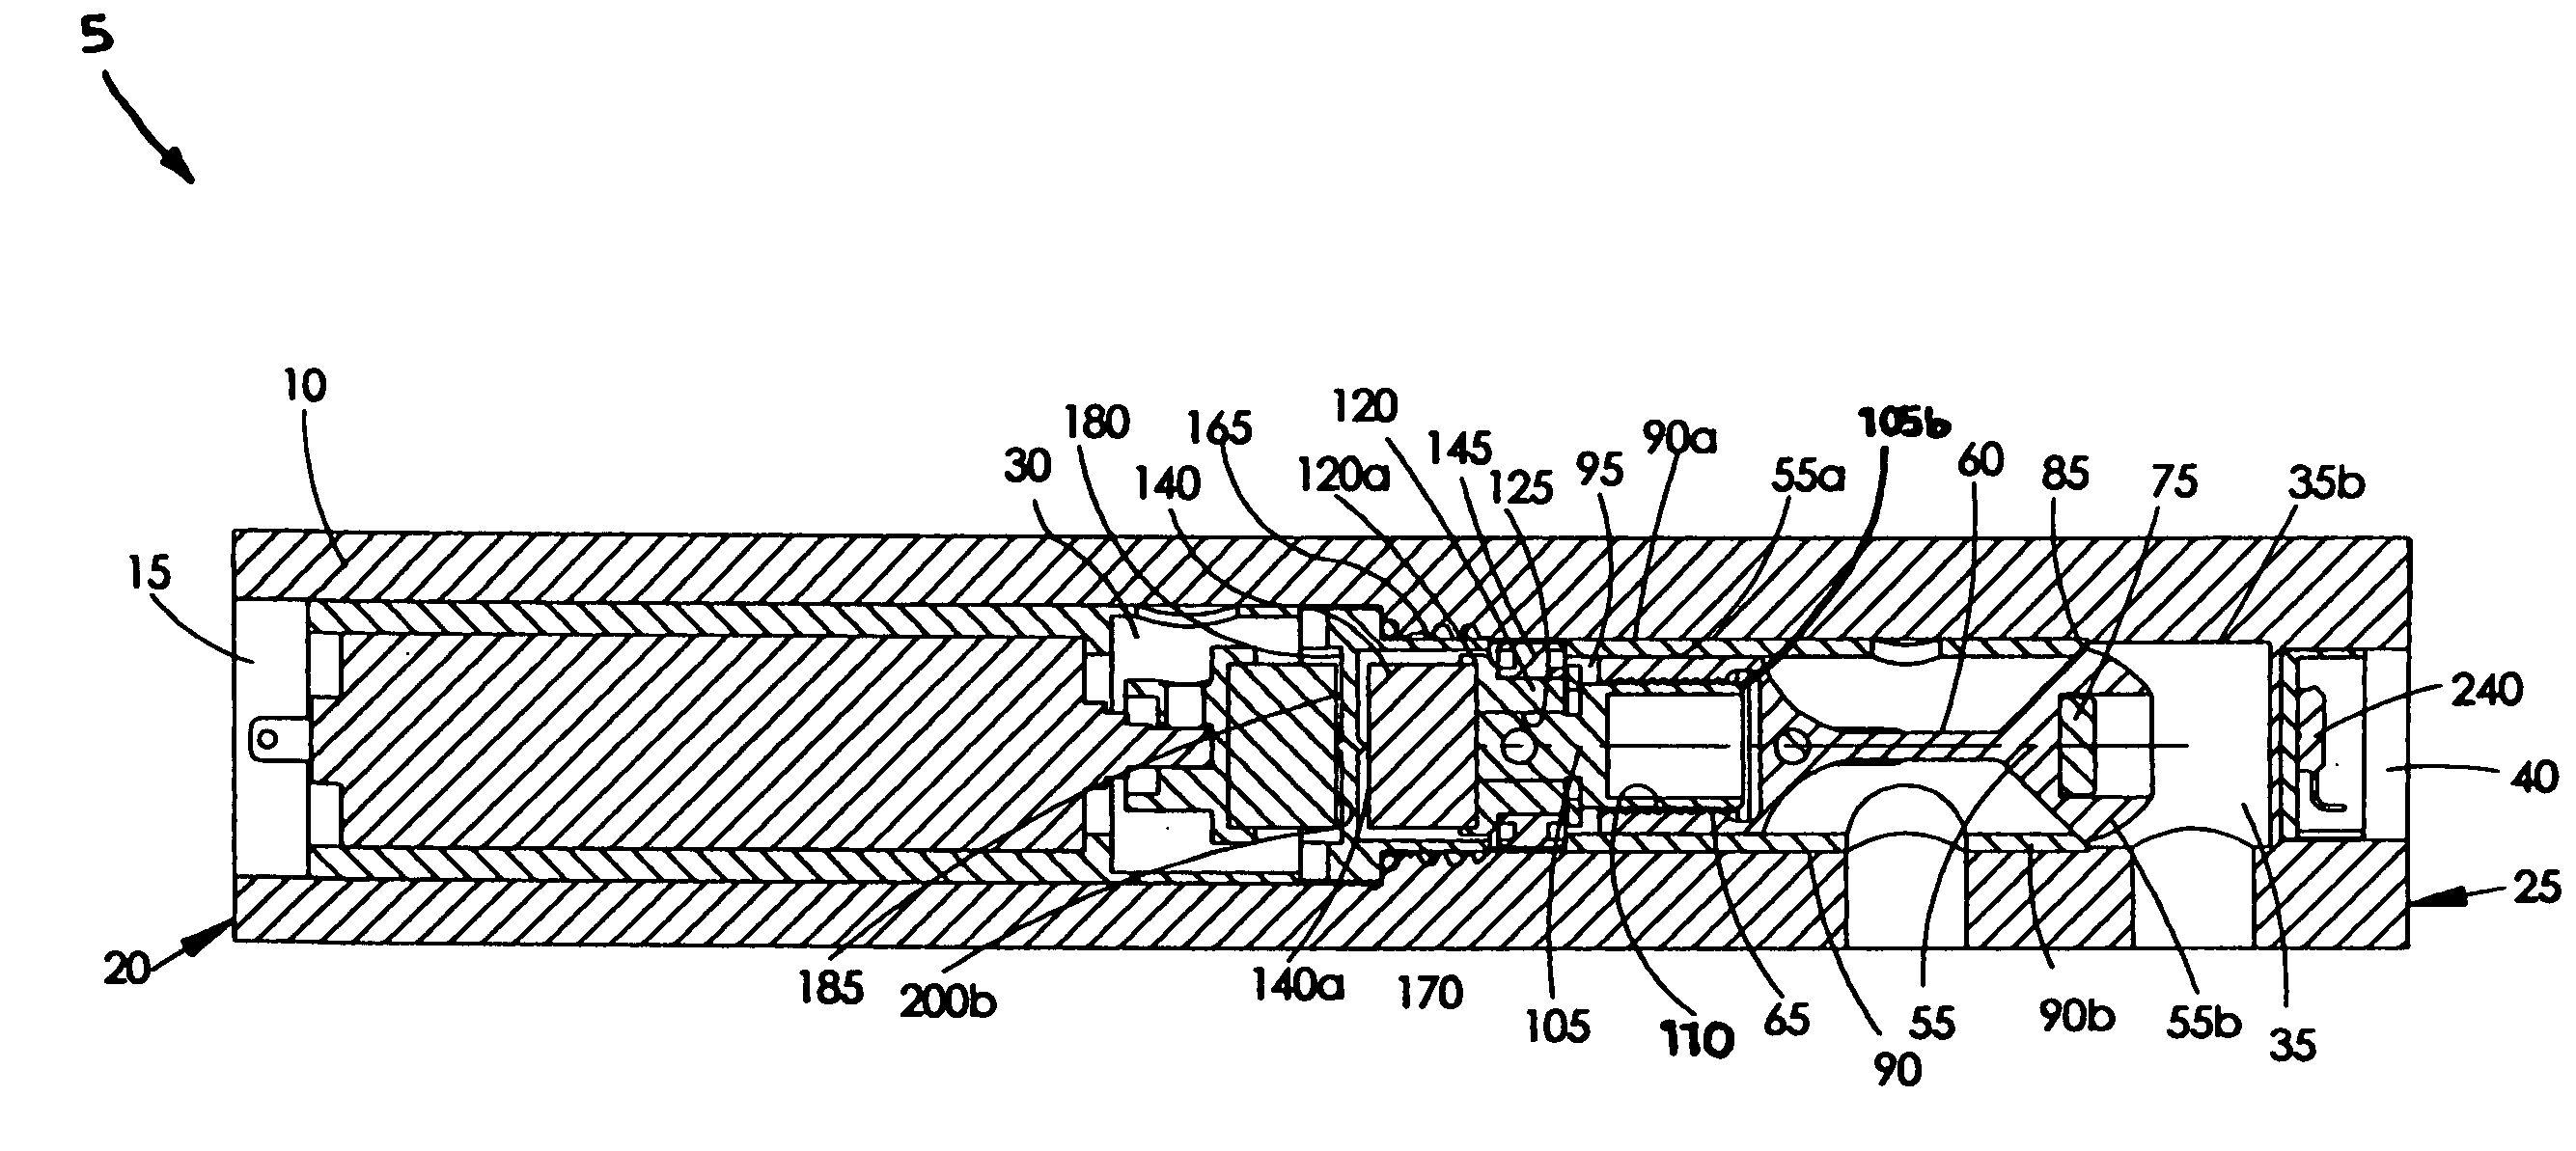 Magnetically-coupled actuating valve assembly